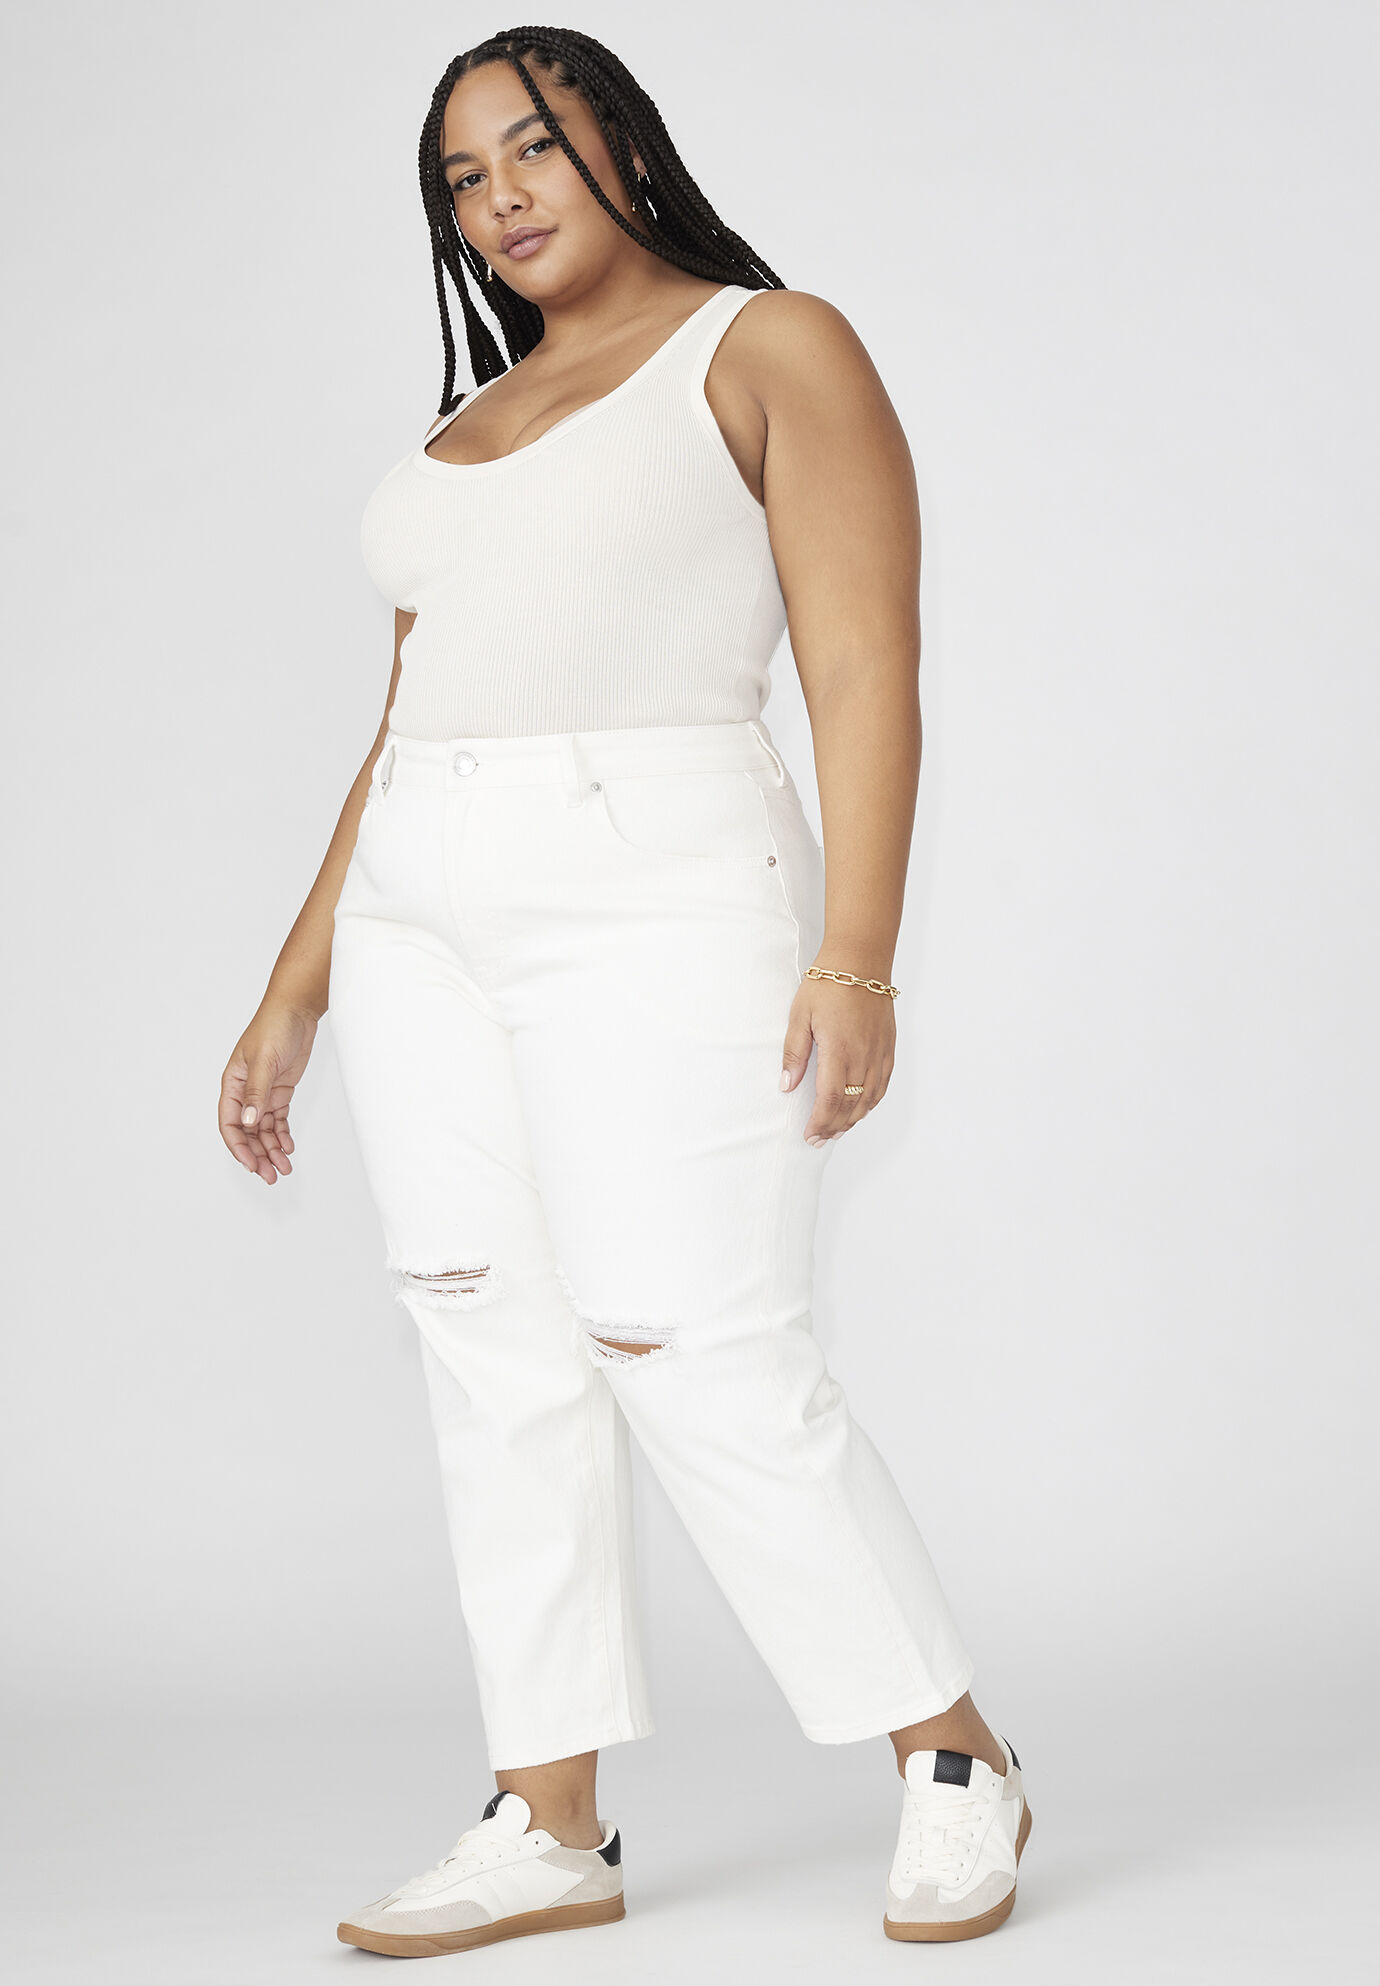 Plus Size Women The Naomi Comfort Stretch Straight Jean Crop By ( Size 24 )